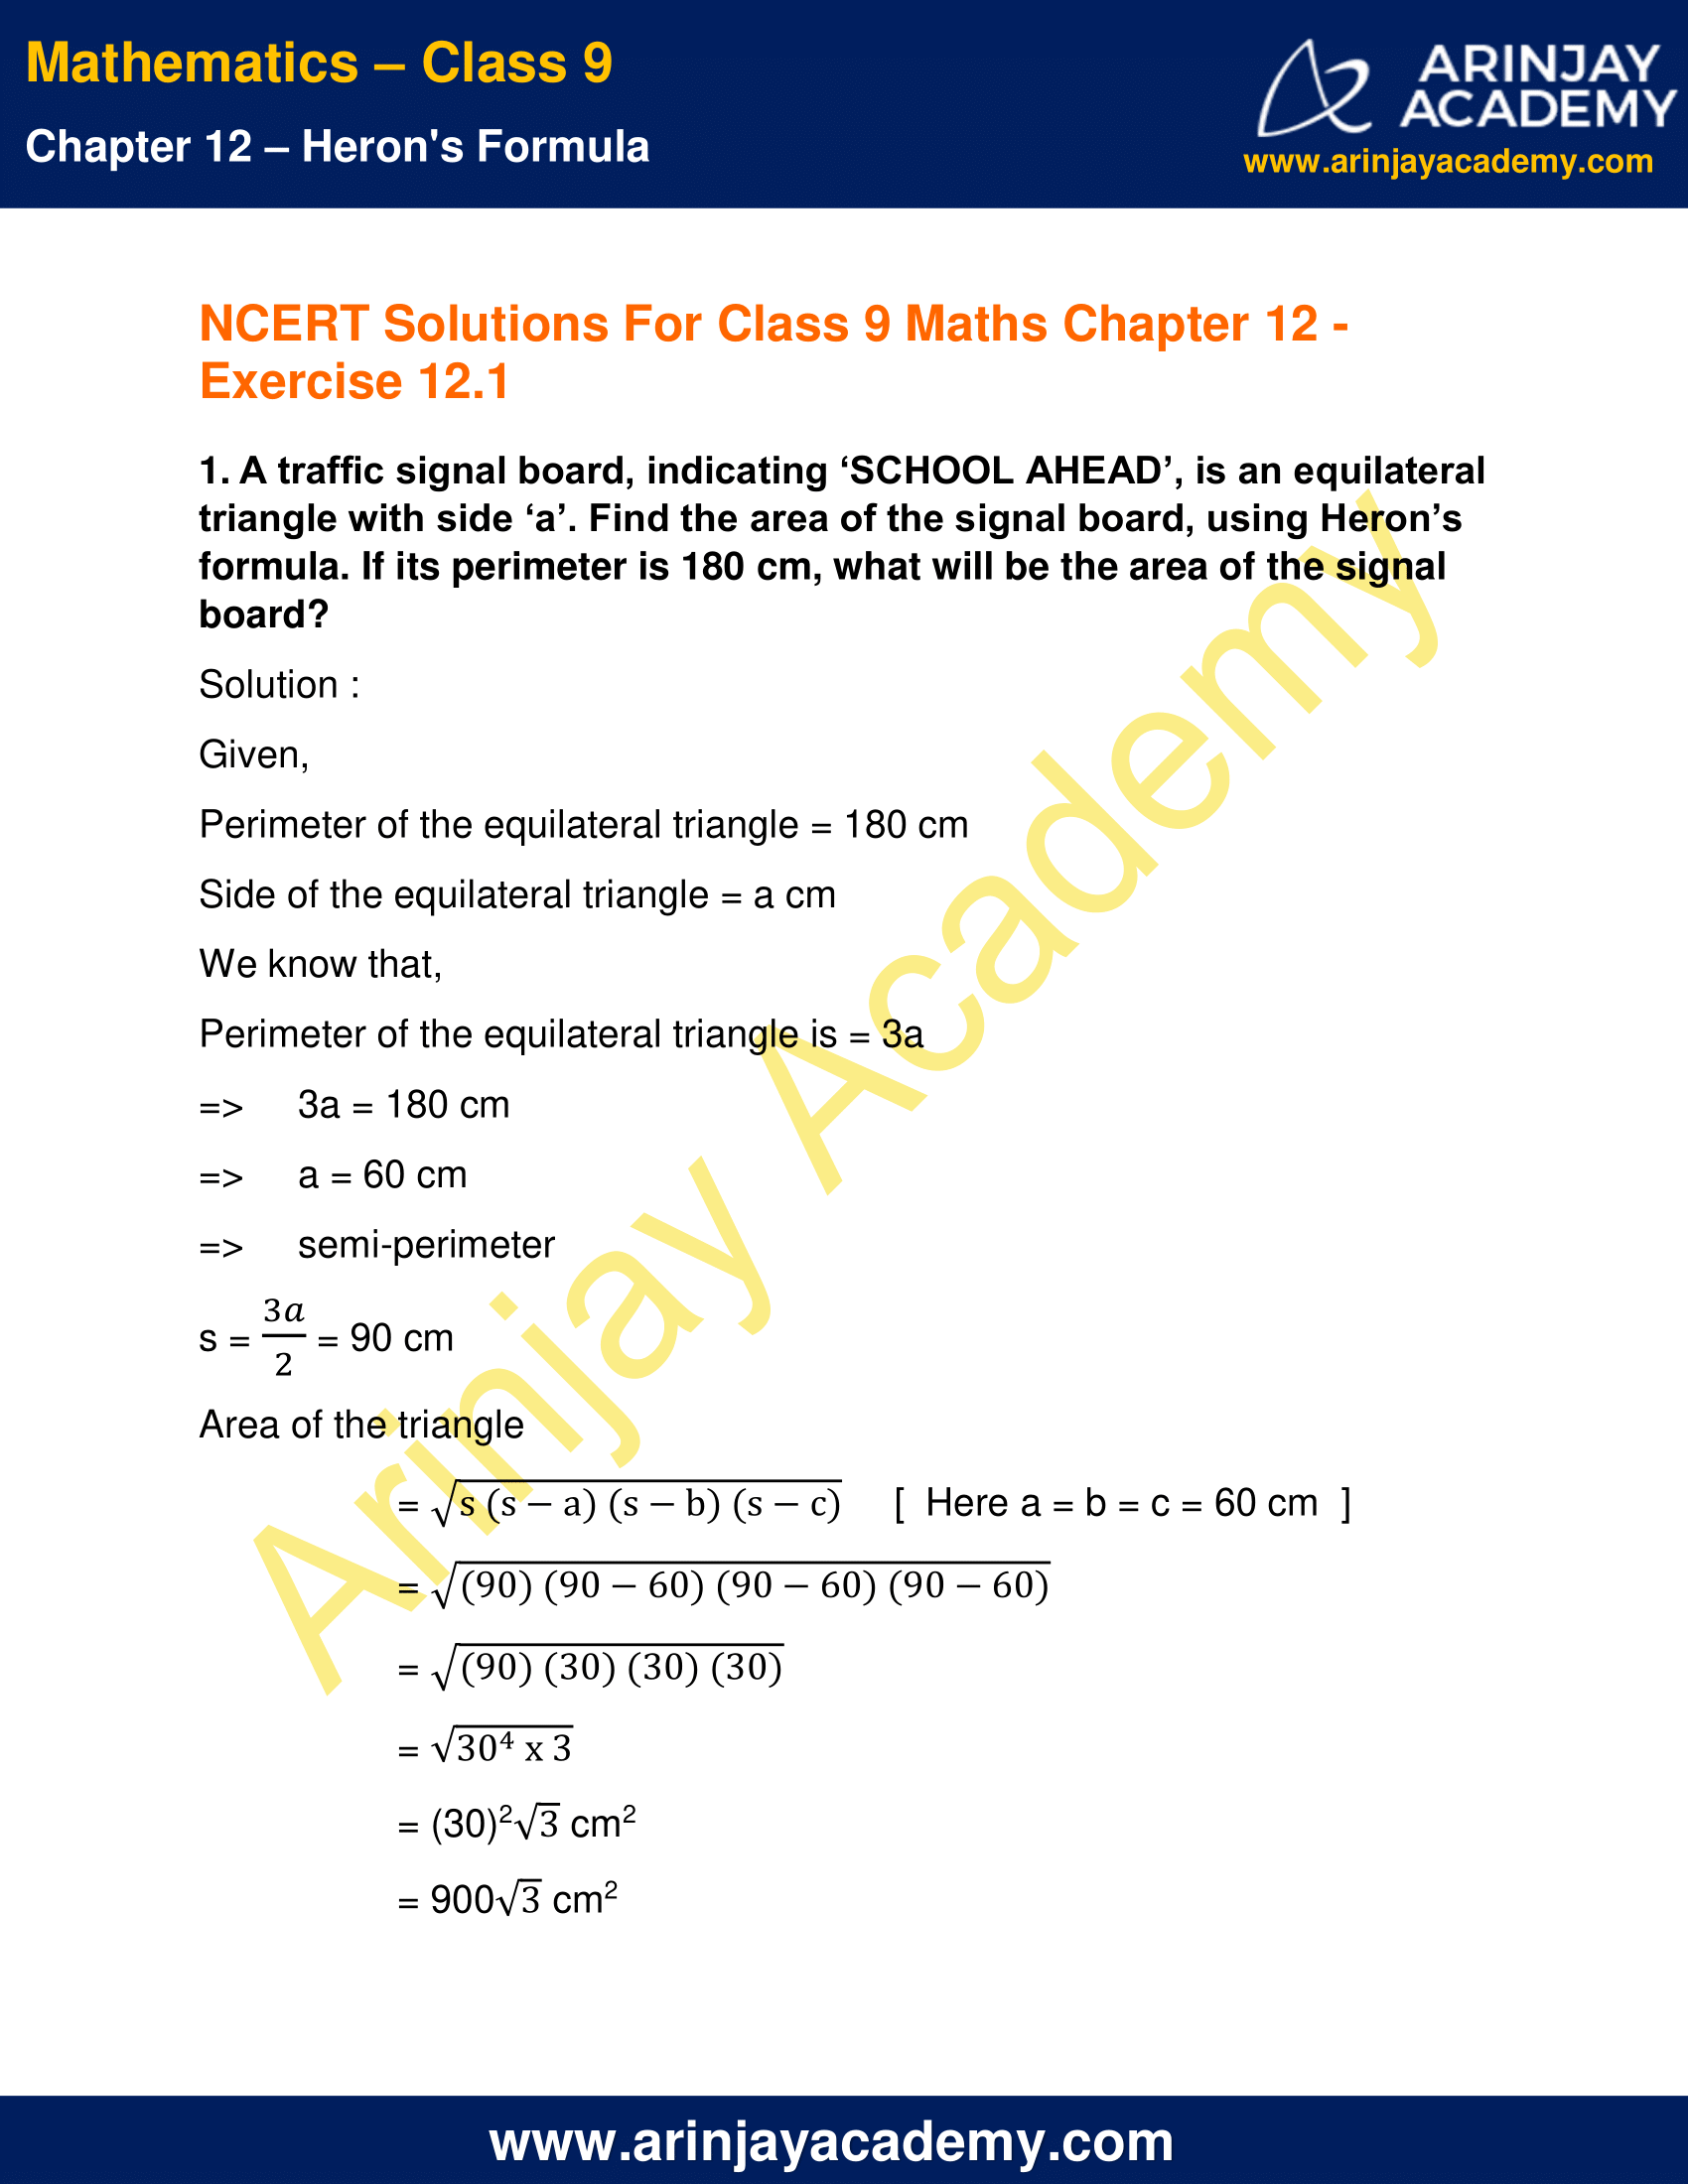 NCERT Solutions For Class 9 Maths Chapter 12 Exercise 12.1 image 1